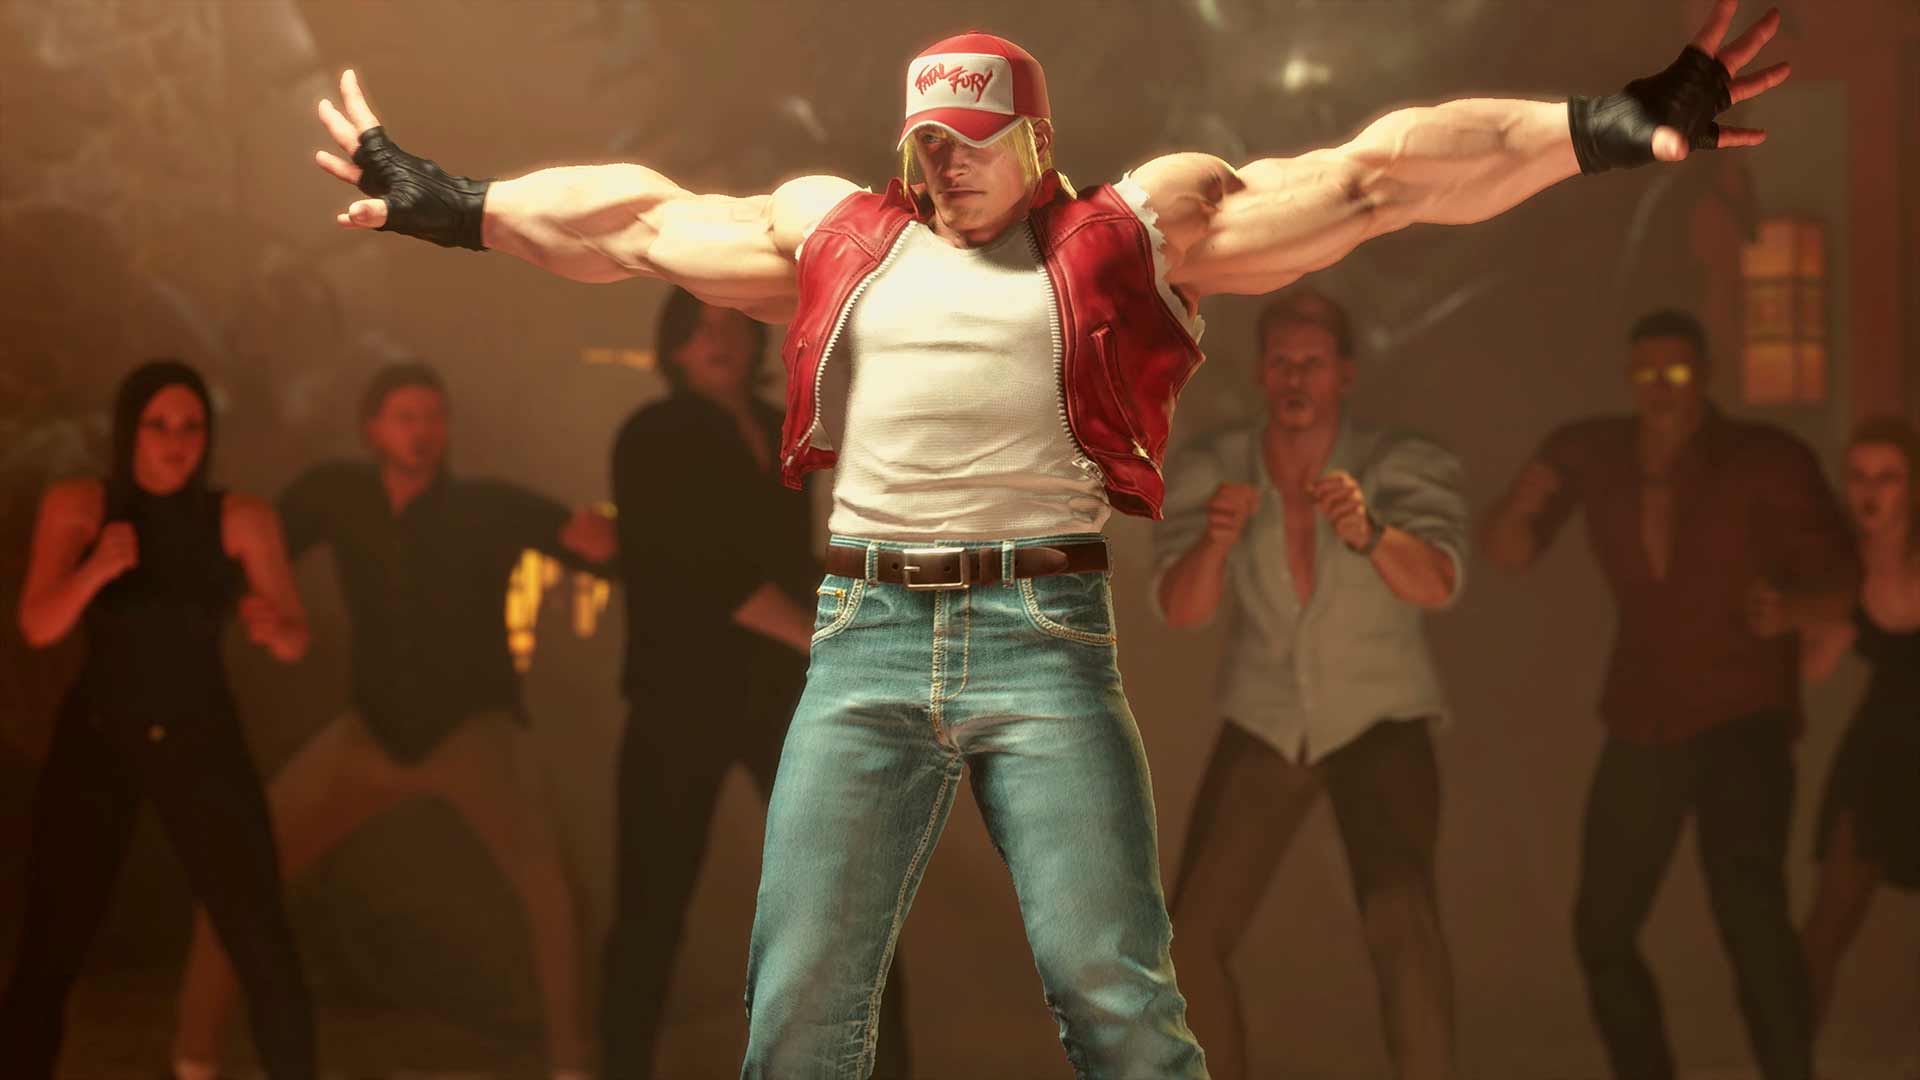 Capcom shared a first-look trailer of Terry Bogard in Street Fighter 6